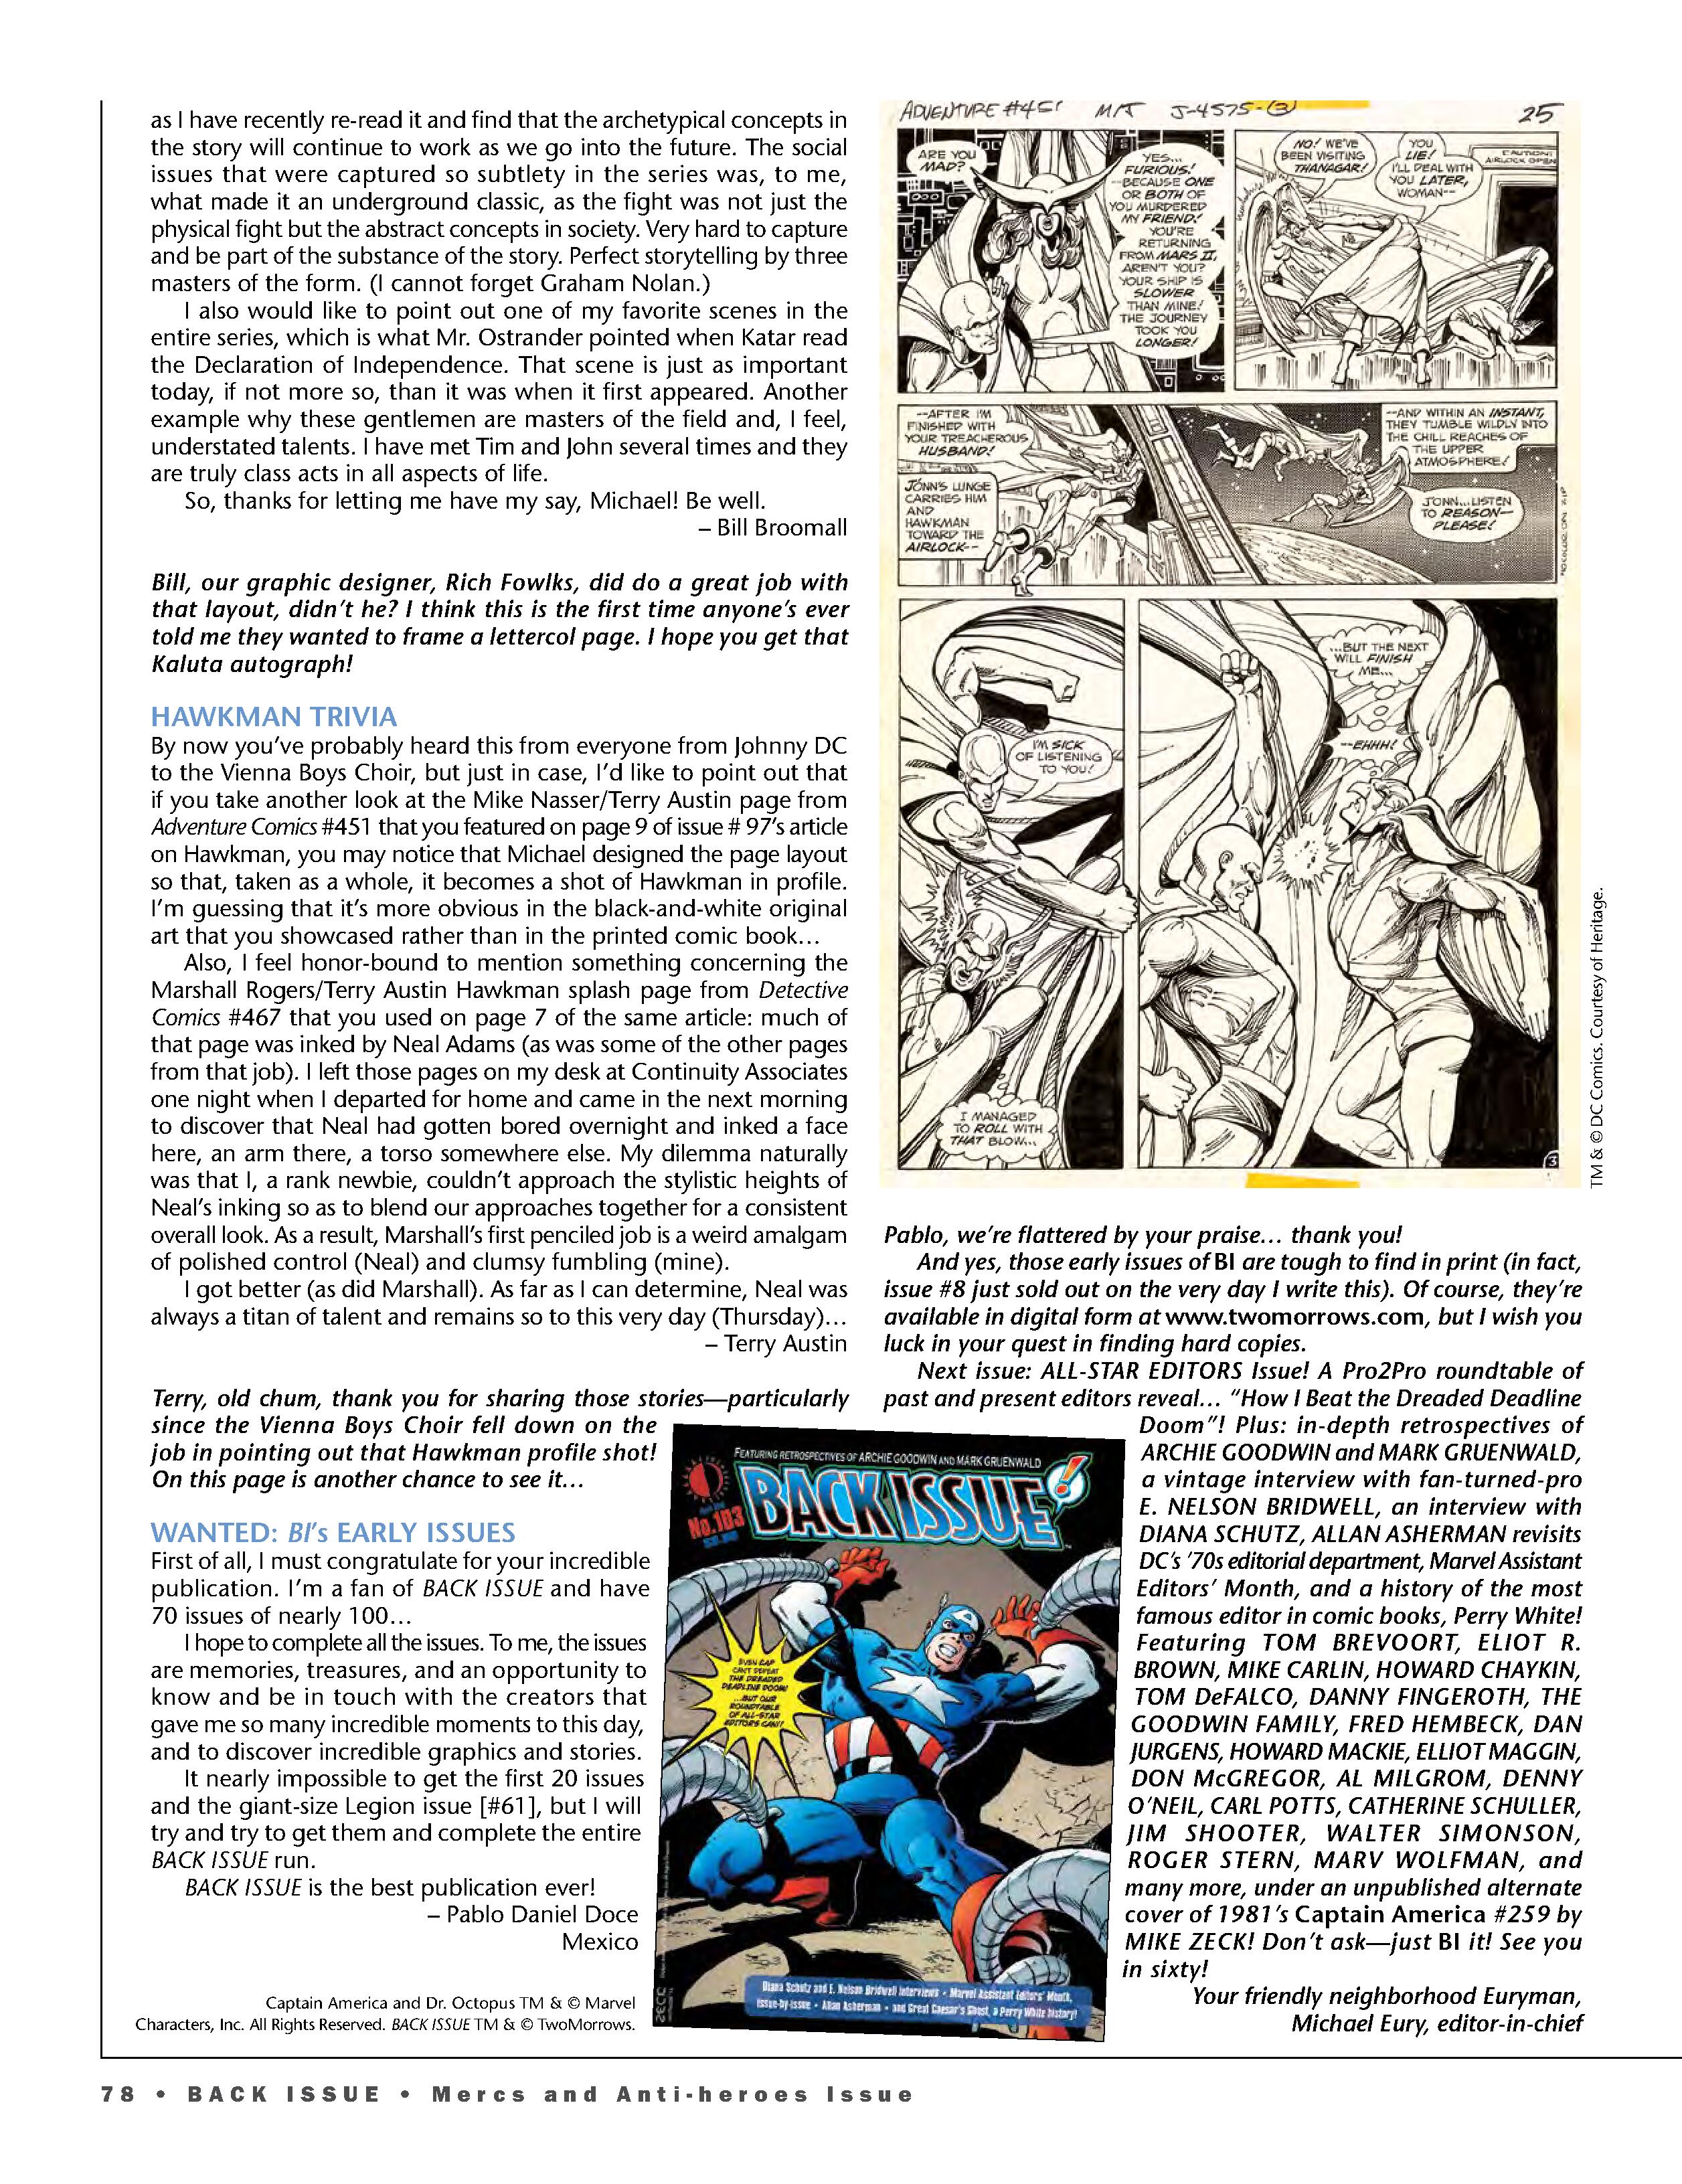 Read online Back Issue comic -  Issue #102 - 80